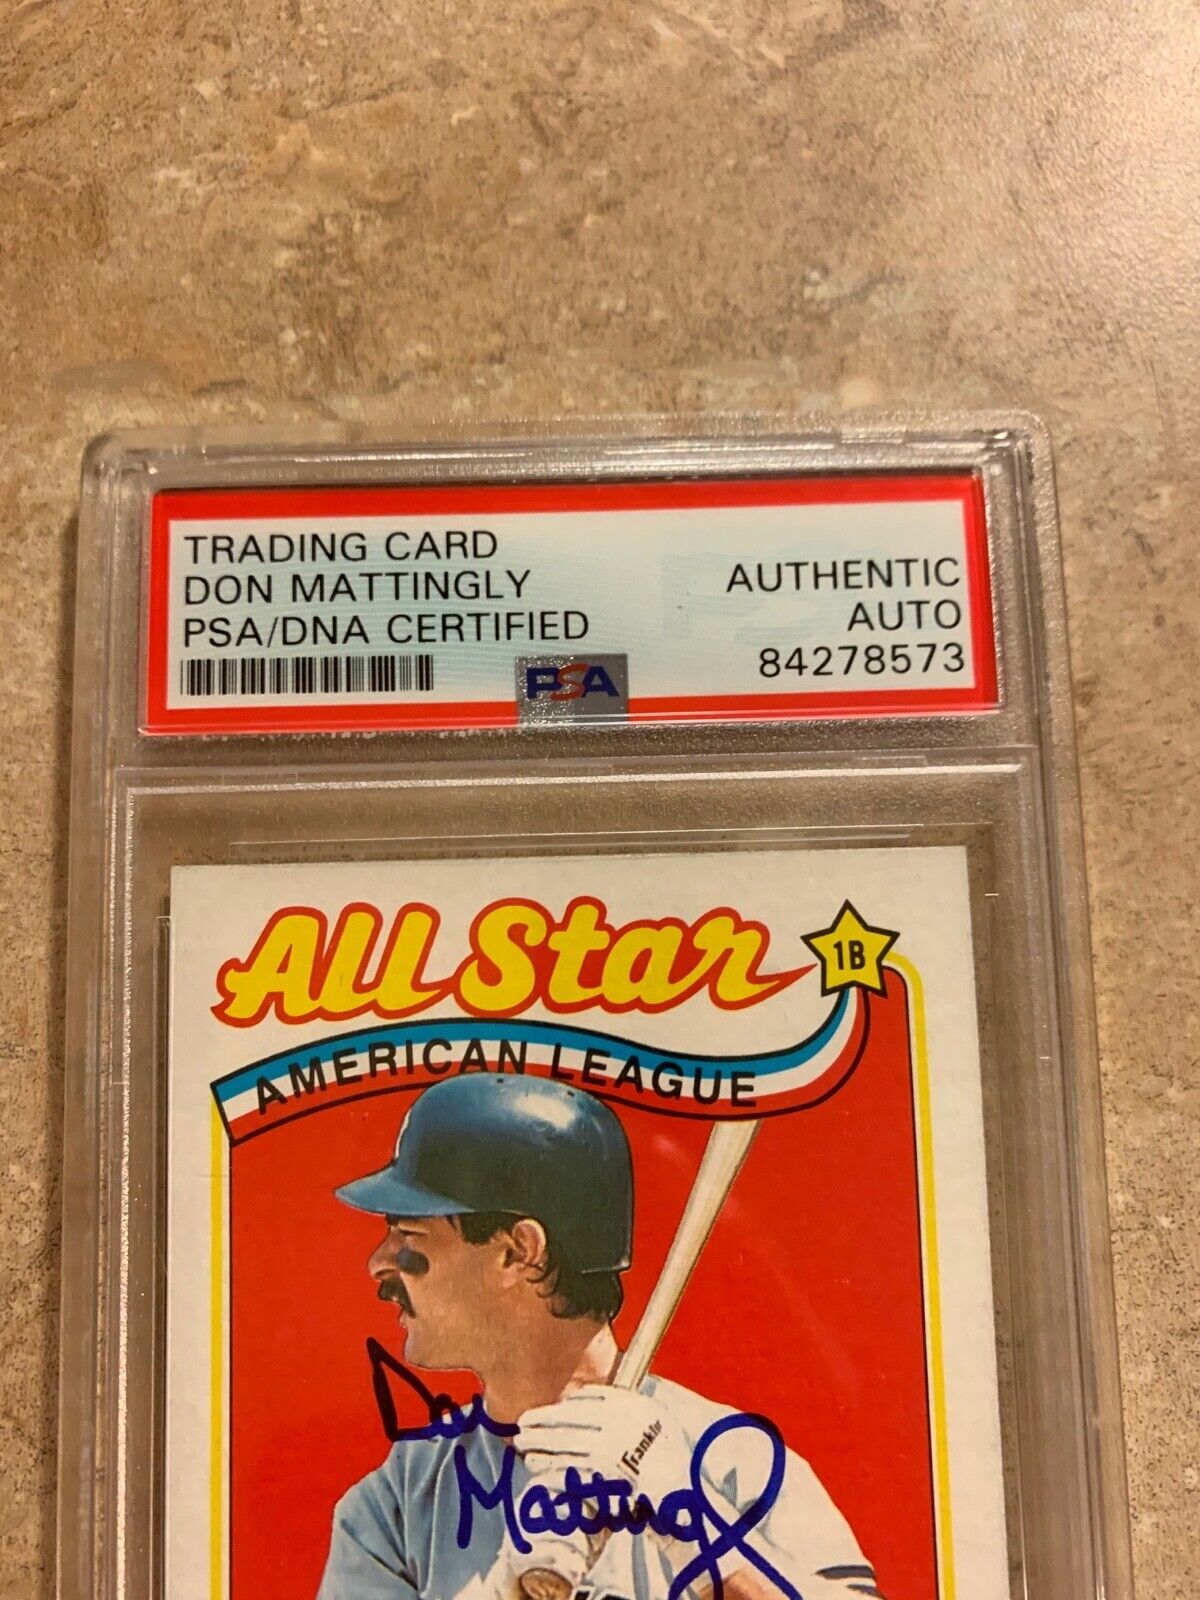 Don Mattingly Old Signature Autographed 1989 Topps Card PSA Slabbed Certified B